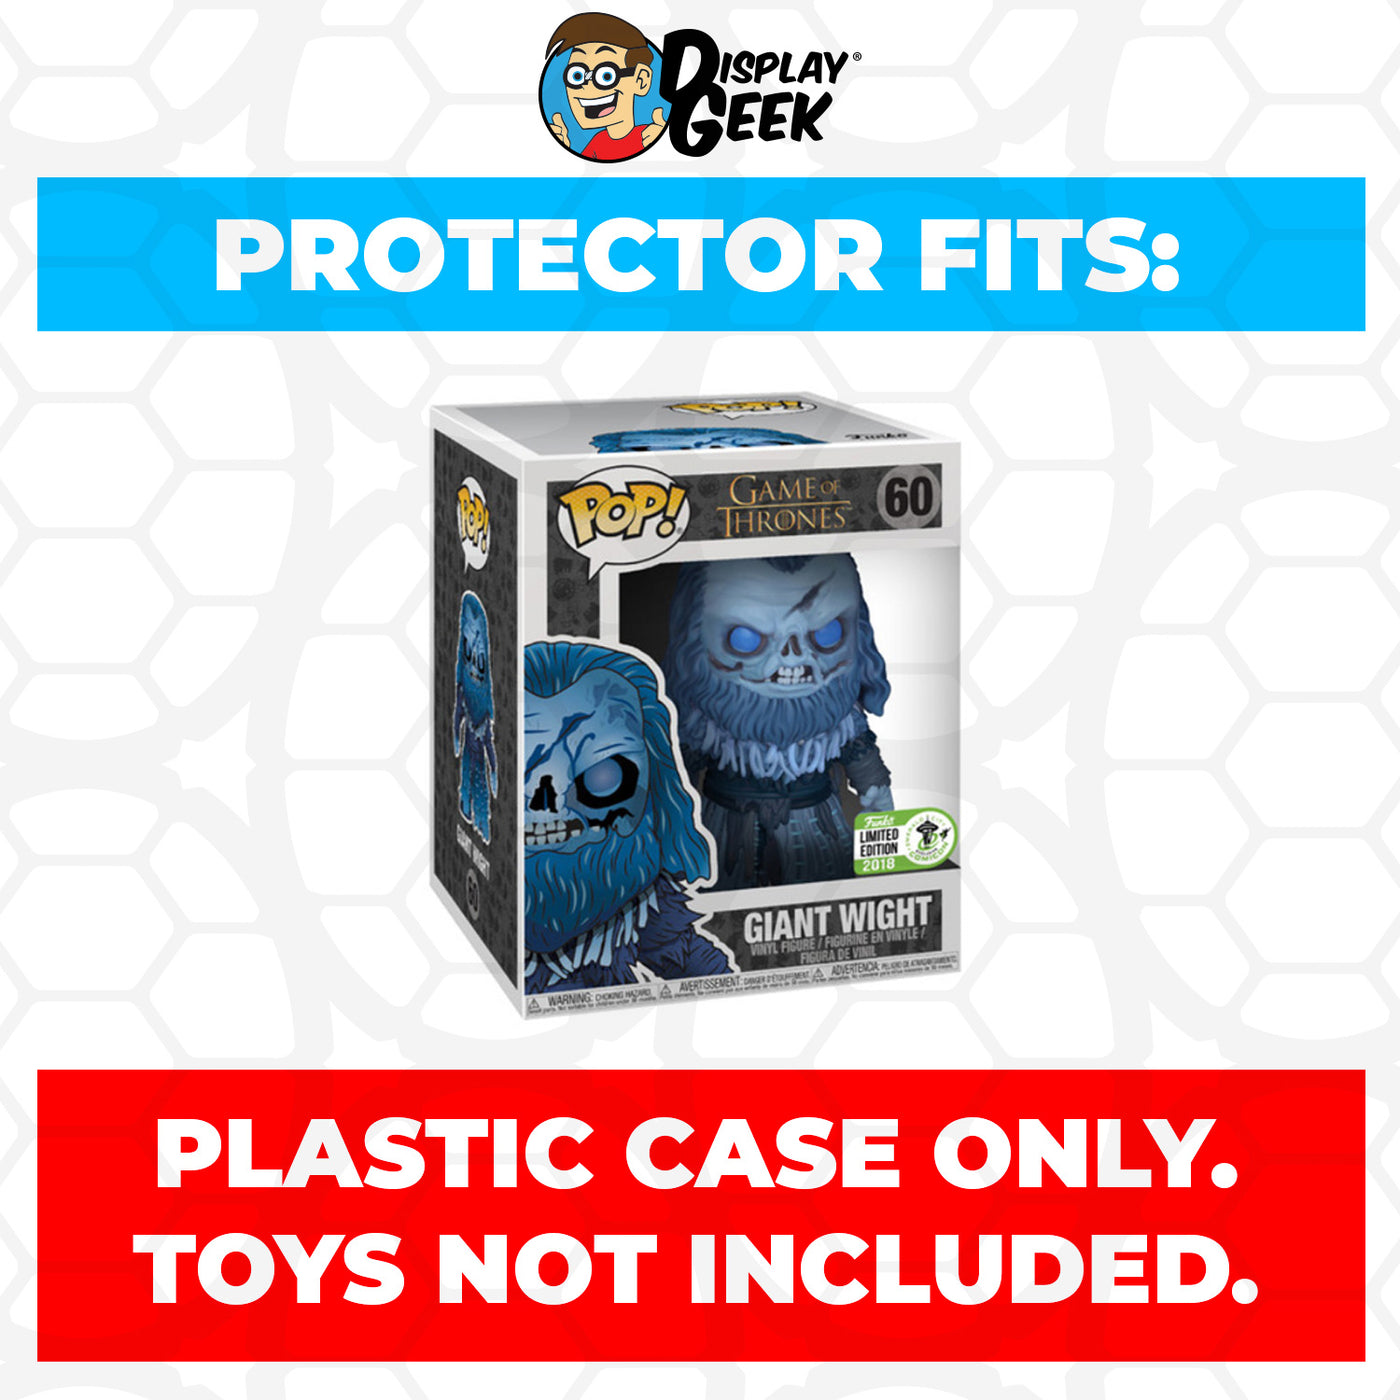 Pop Protector for 6 inch Giant Wight ECCC #60 Super Funko Pop on The Protector Guide App by Display Geek